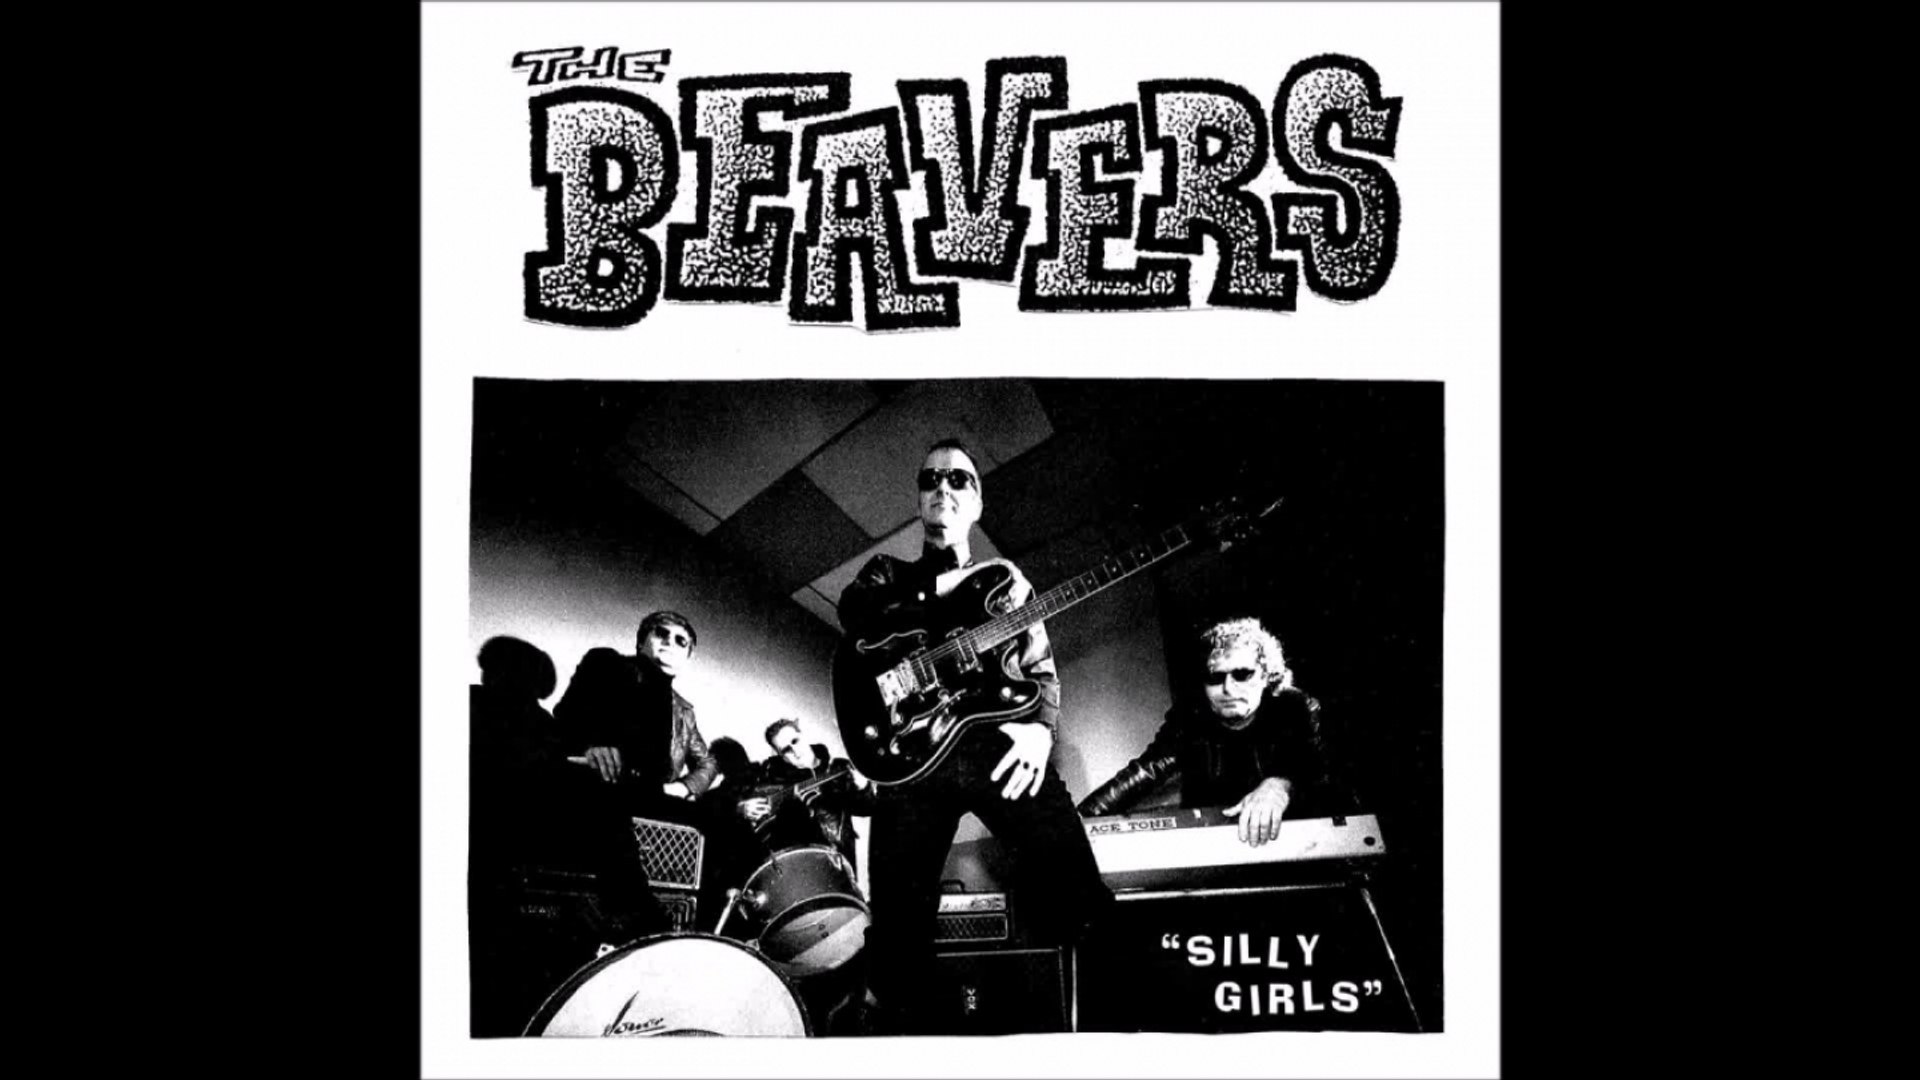 THE BEAVERS - Link's dead